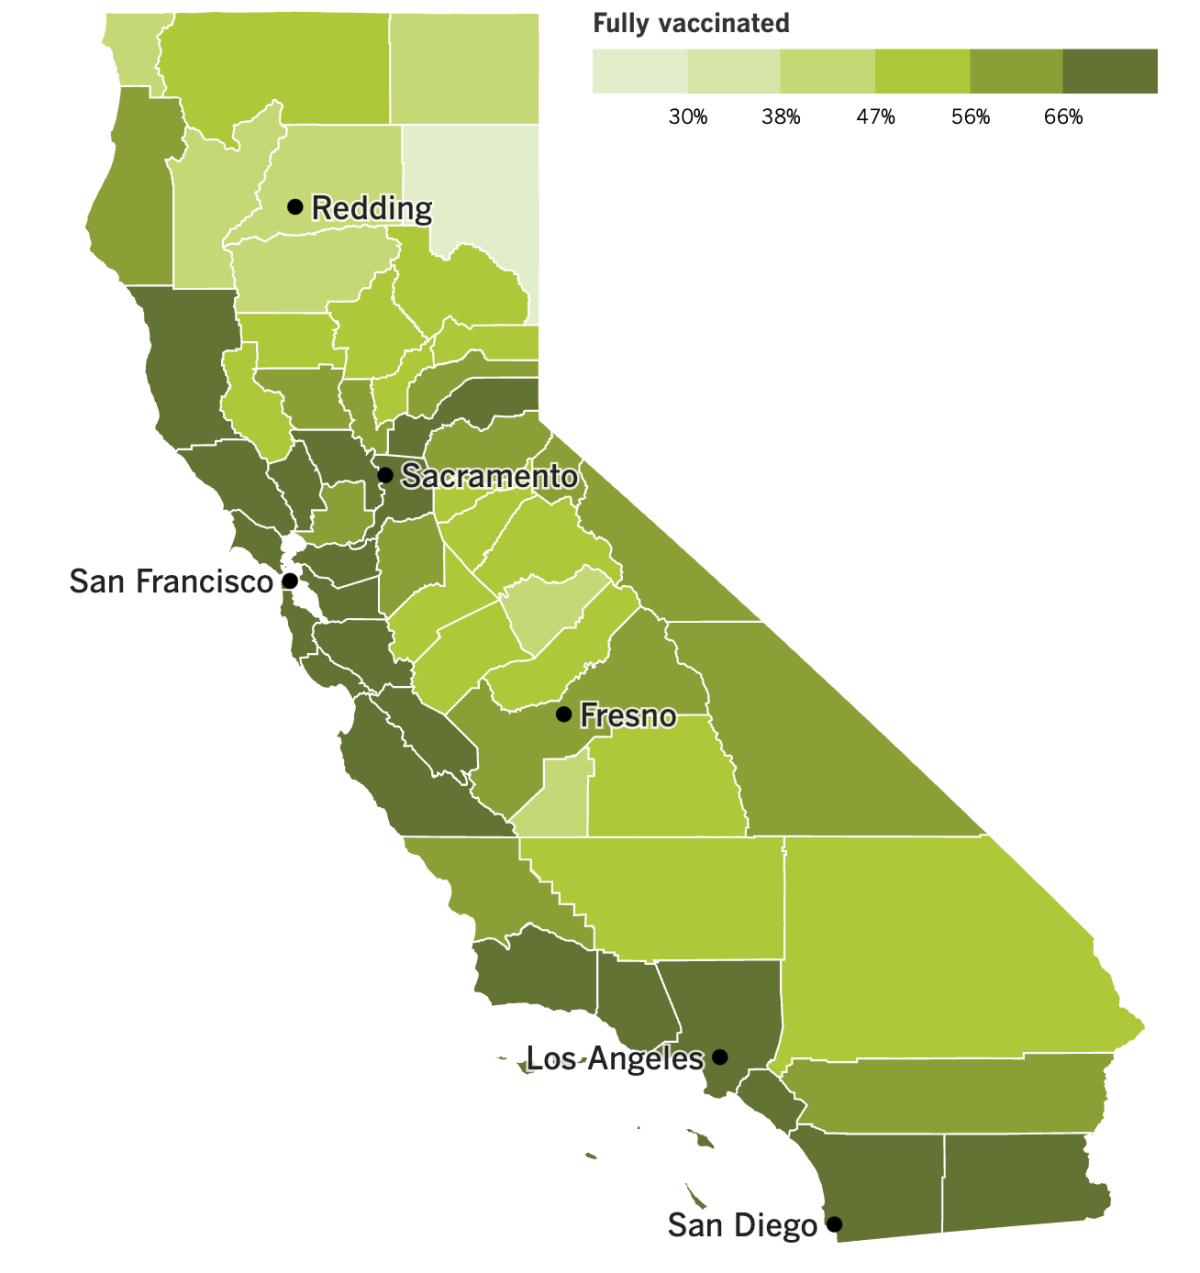 A map that shows California's vaccination progress by county.